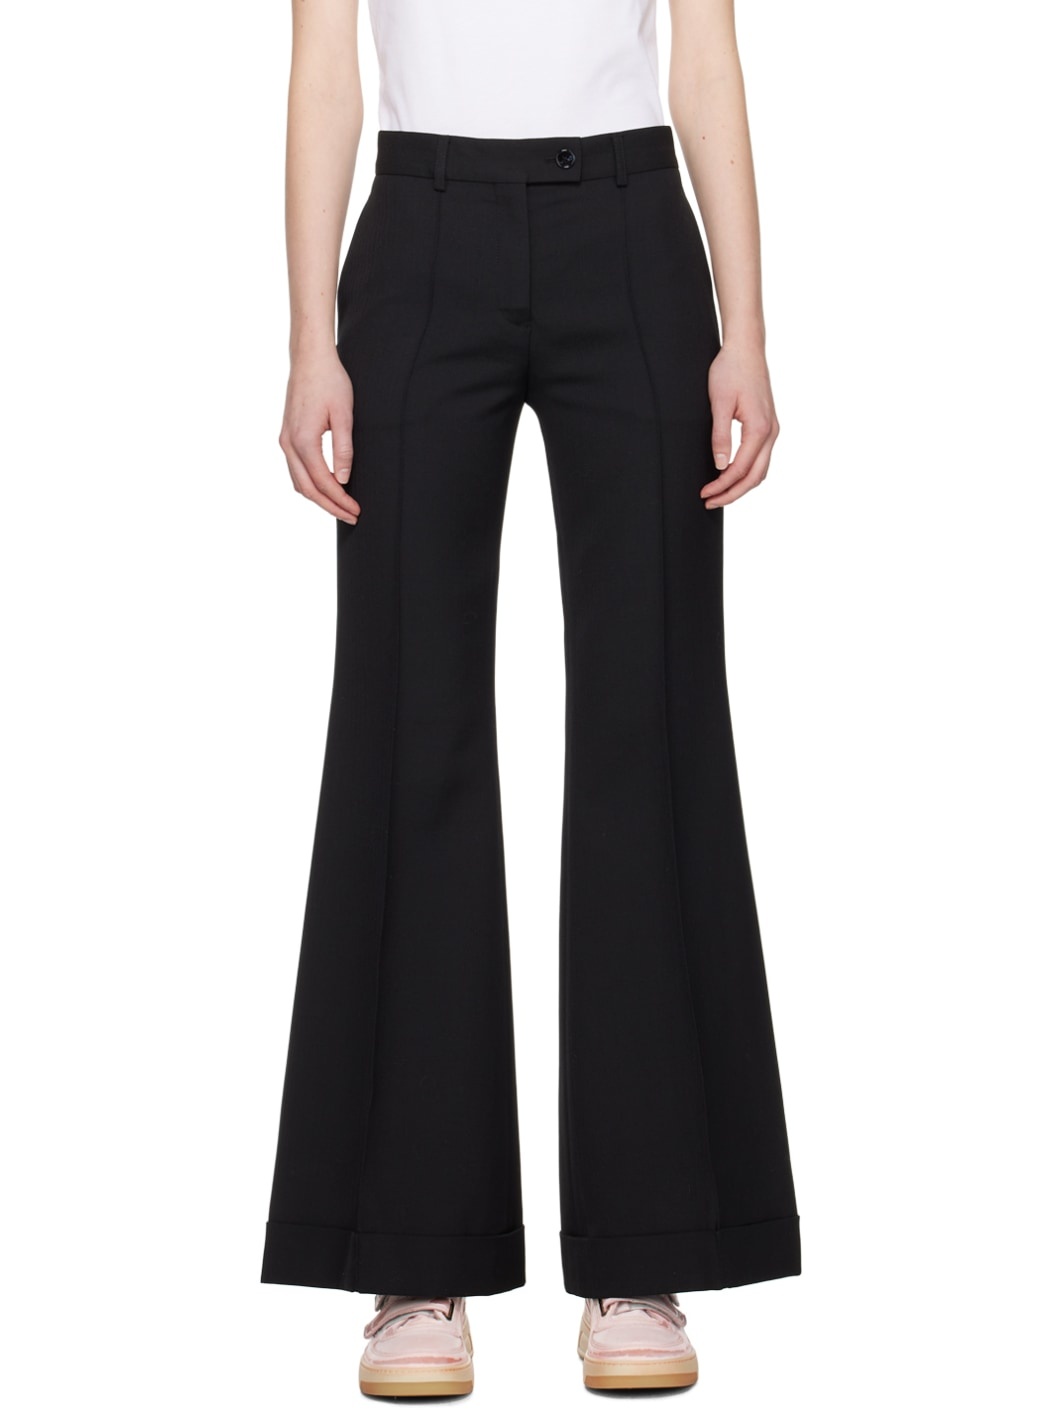 Black Tailored Trousers - 1